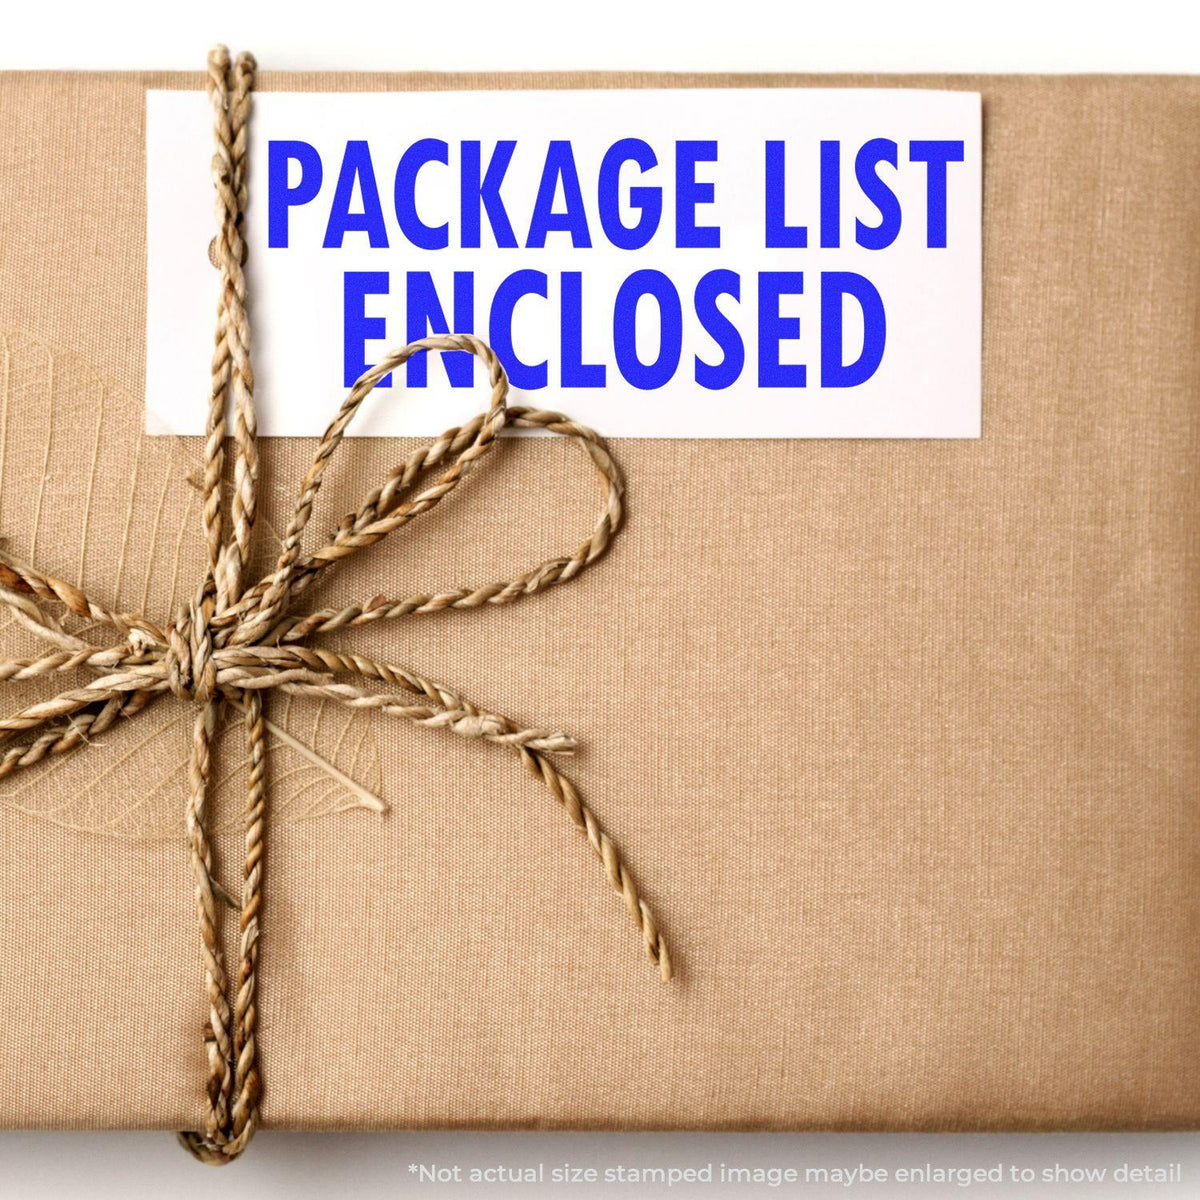 In Use Large Package List Enclosed Rubber Stamp Image